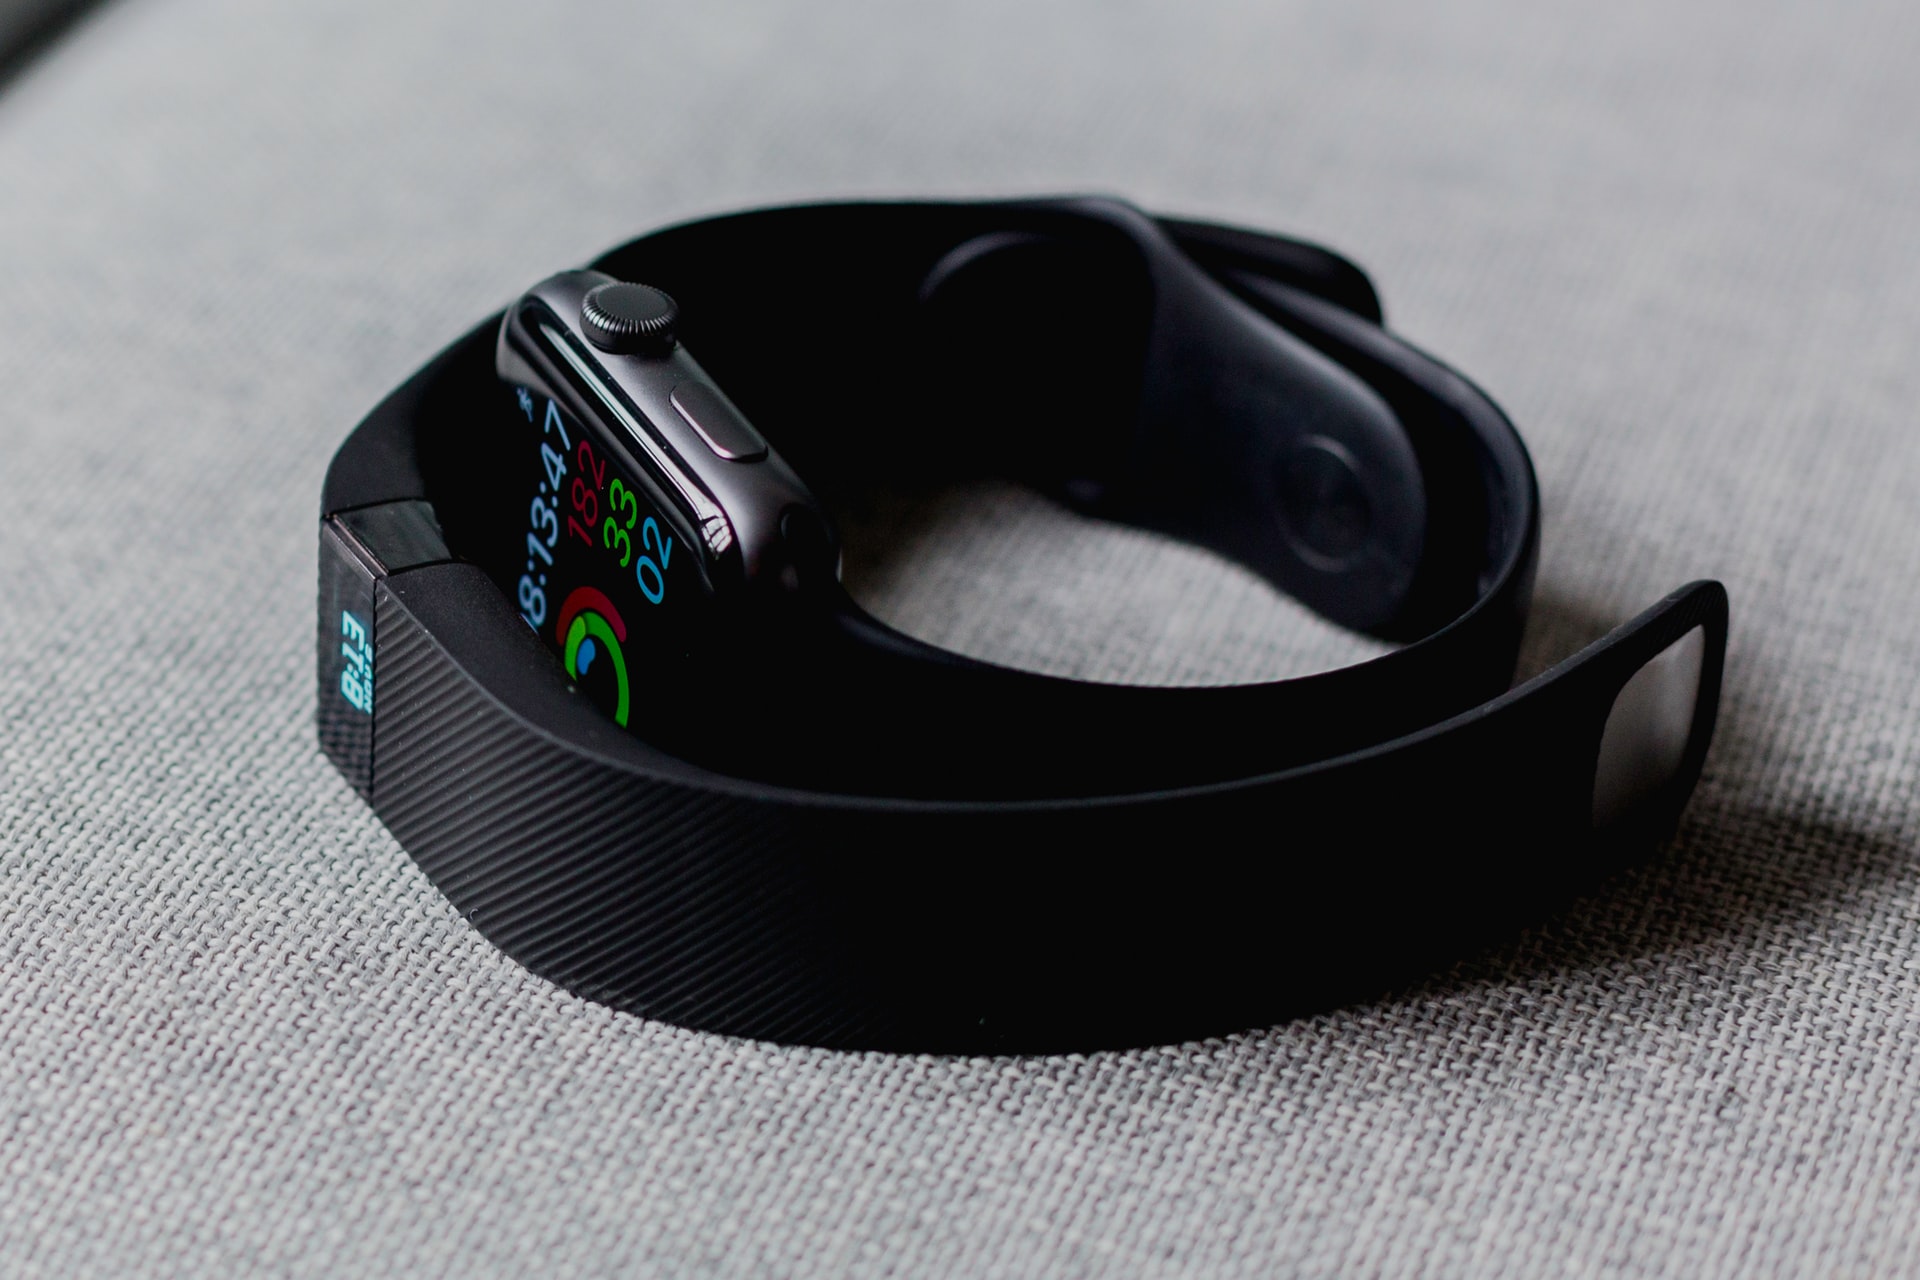 Will the Luxury versions of Fitbit coming out in the future